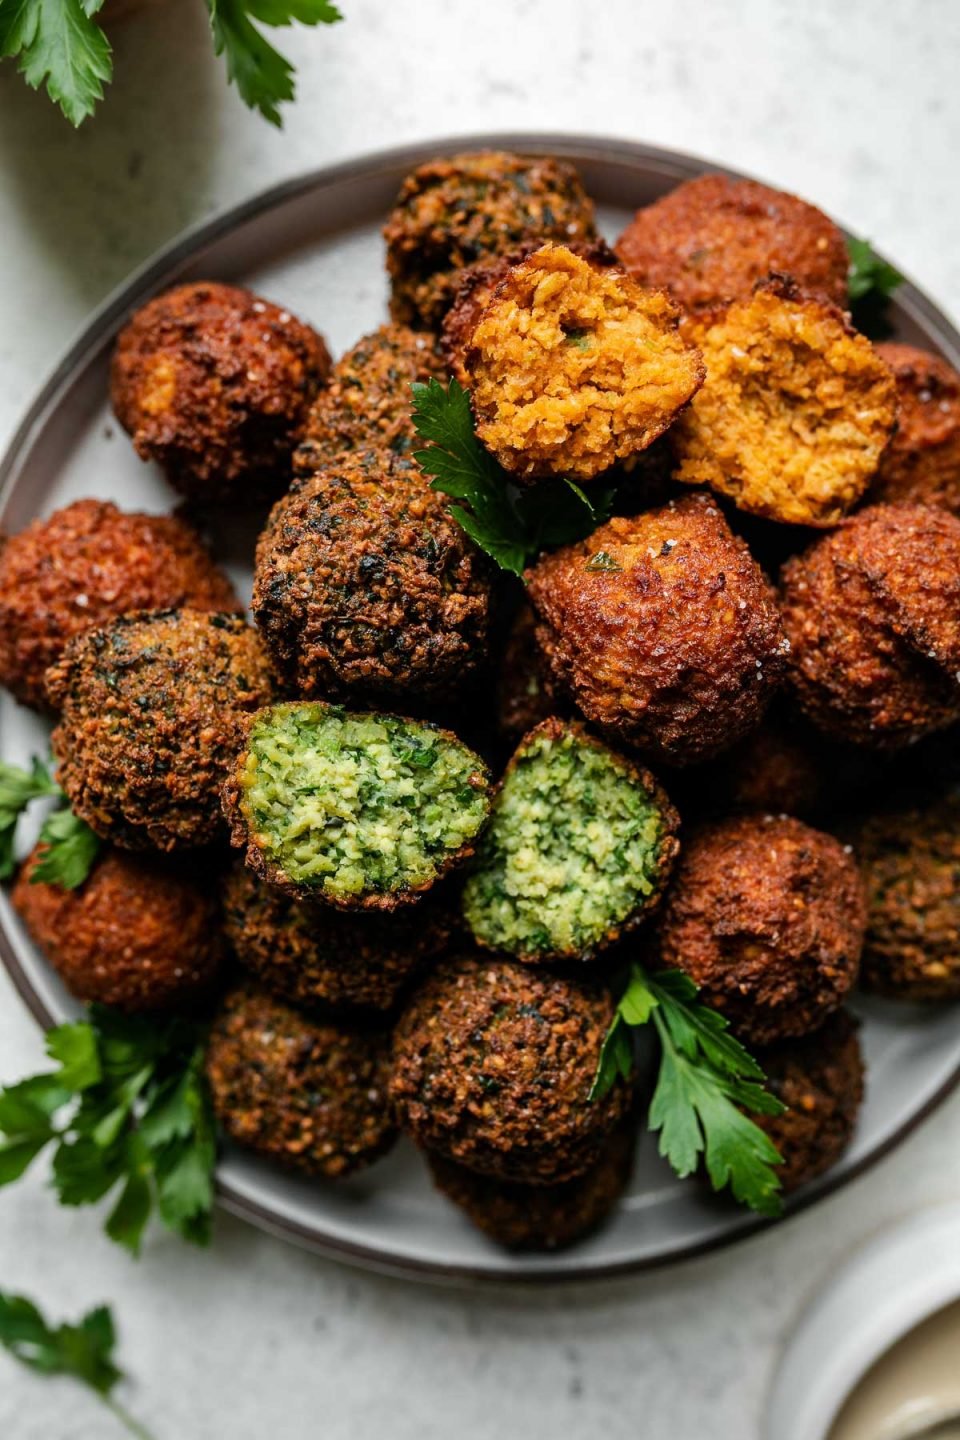 Browned & crispy cooked spicy red harissa and herby green falafel balls arranged on a gray ceramic plate. The plate sits atop a creamy white textured surface and is garnished with fresh parsley leaves. A small white bowl filled with tahini sauce and a small bowl filled with a bunch of fresh parsley surround the plate.